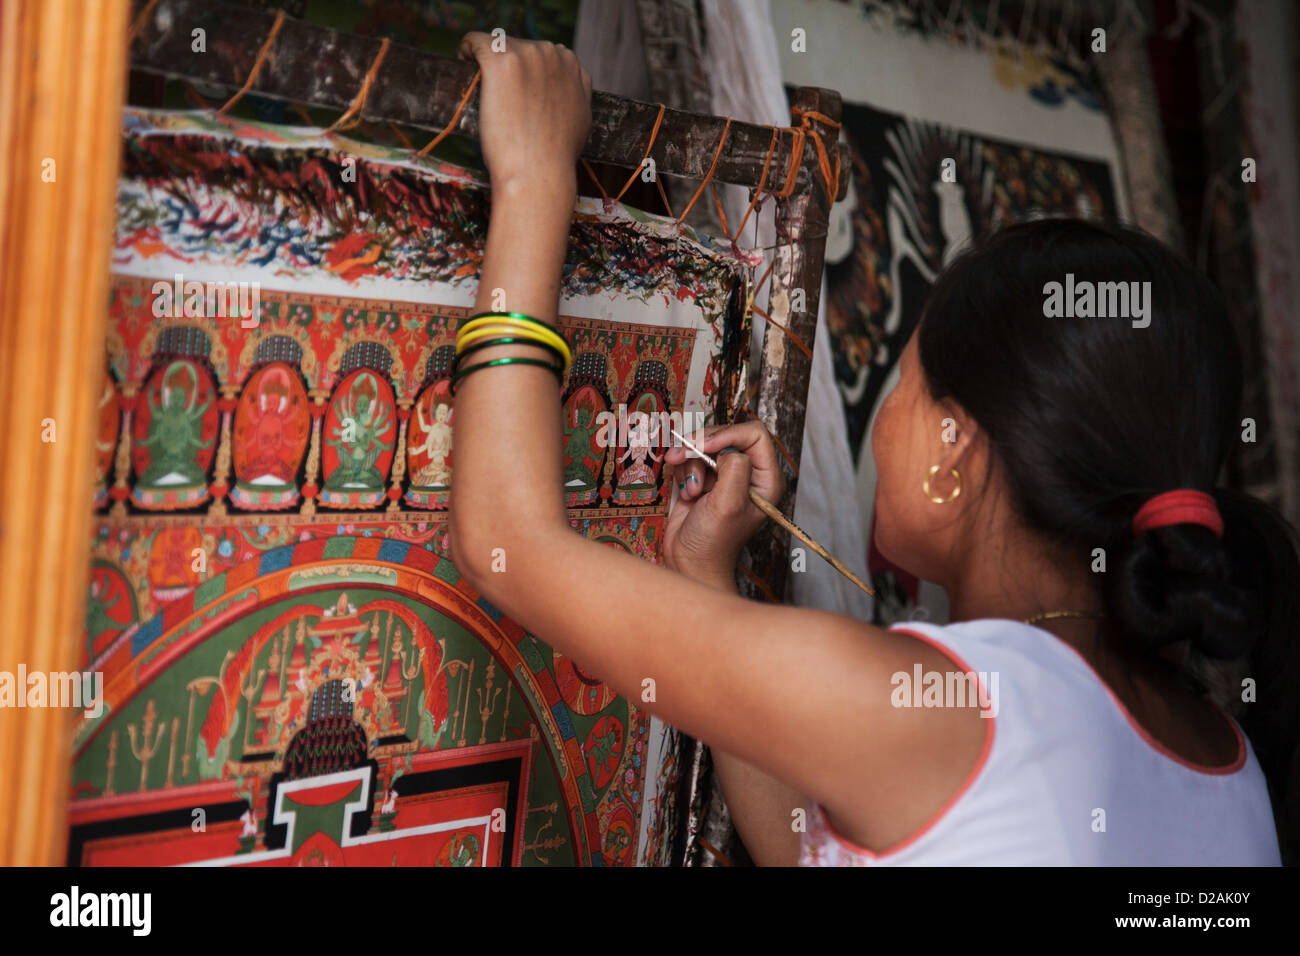 A young Nepalese woman works on a painting in a gallery off the Bhaktapur Durbar Square. Stock Photo